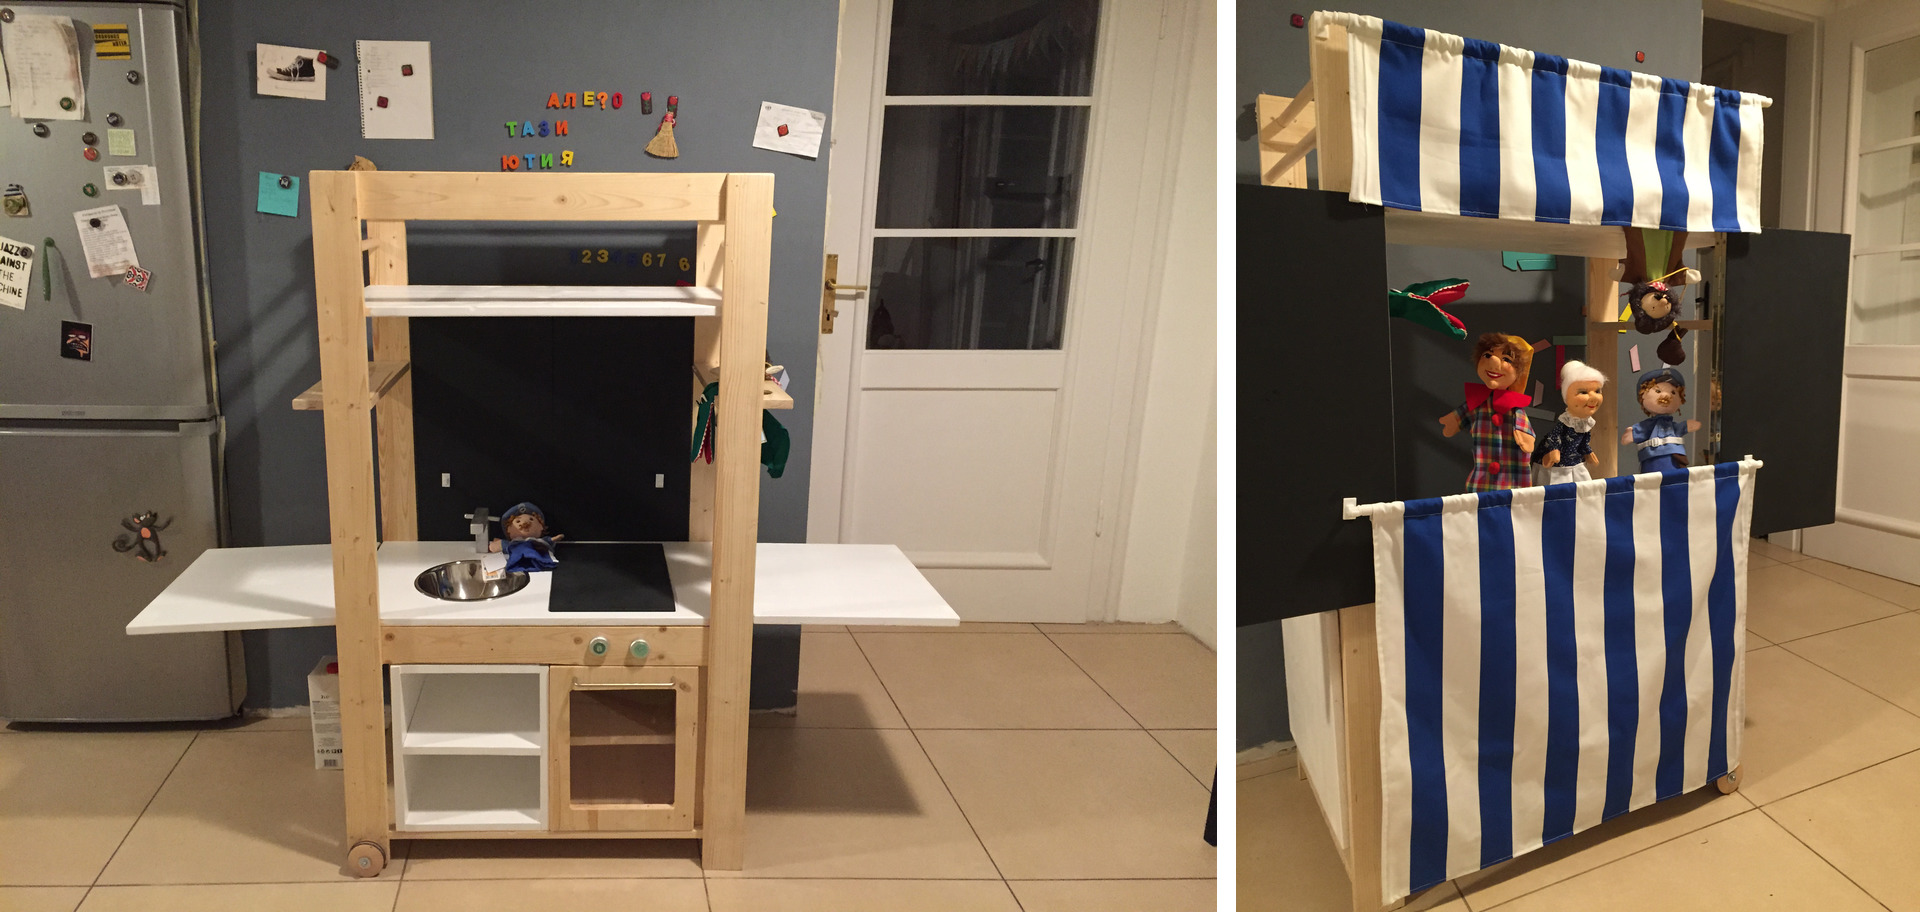 Puppet theater and kids' kitchen at once